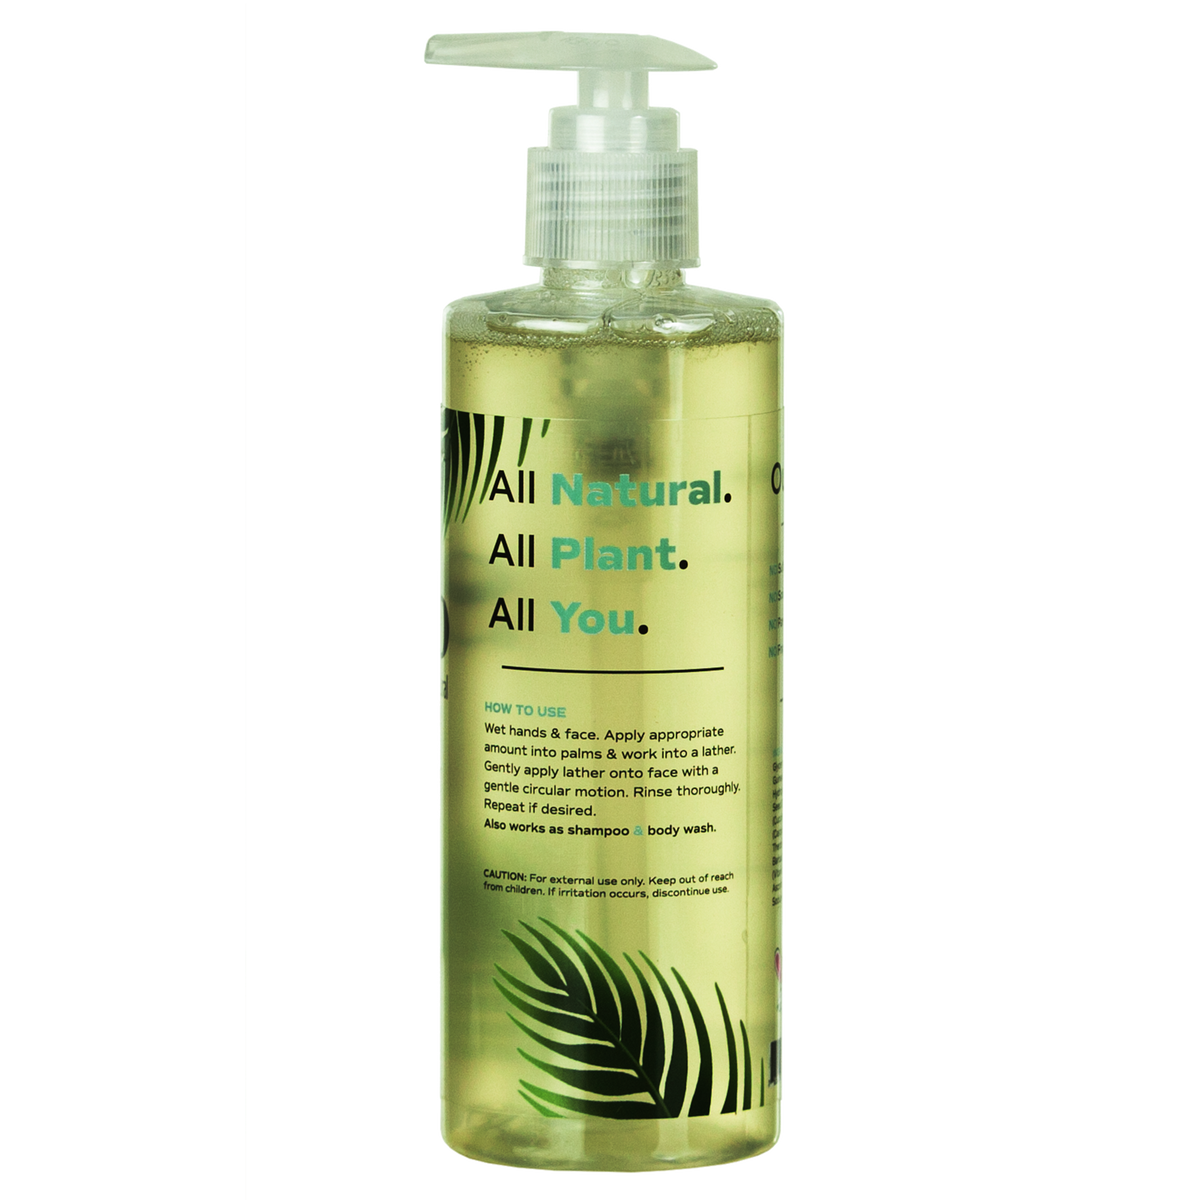 Limited Edition Sapo All Natural Cucumber Face Cleanser